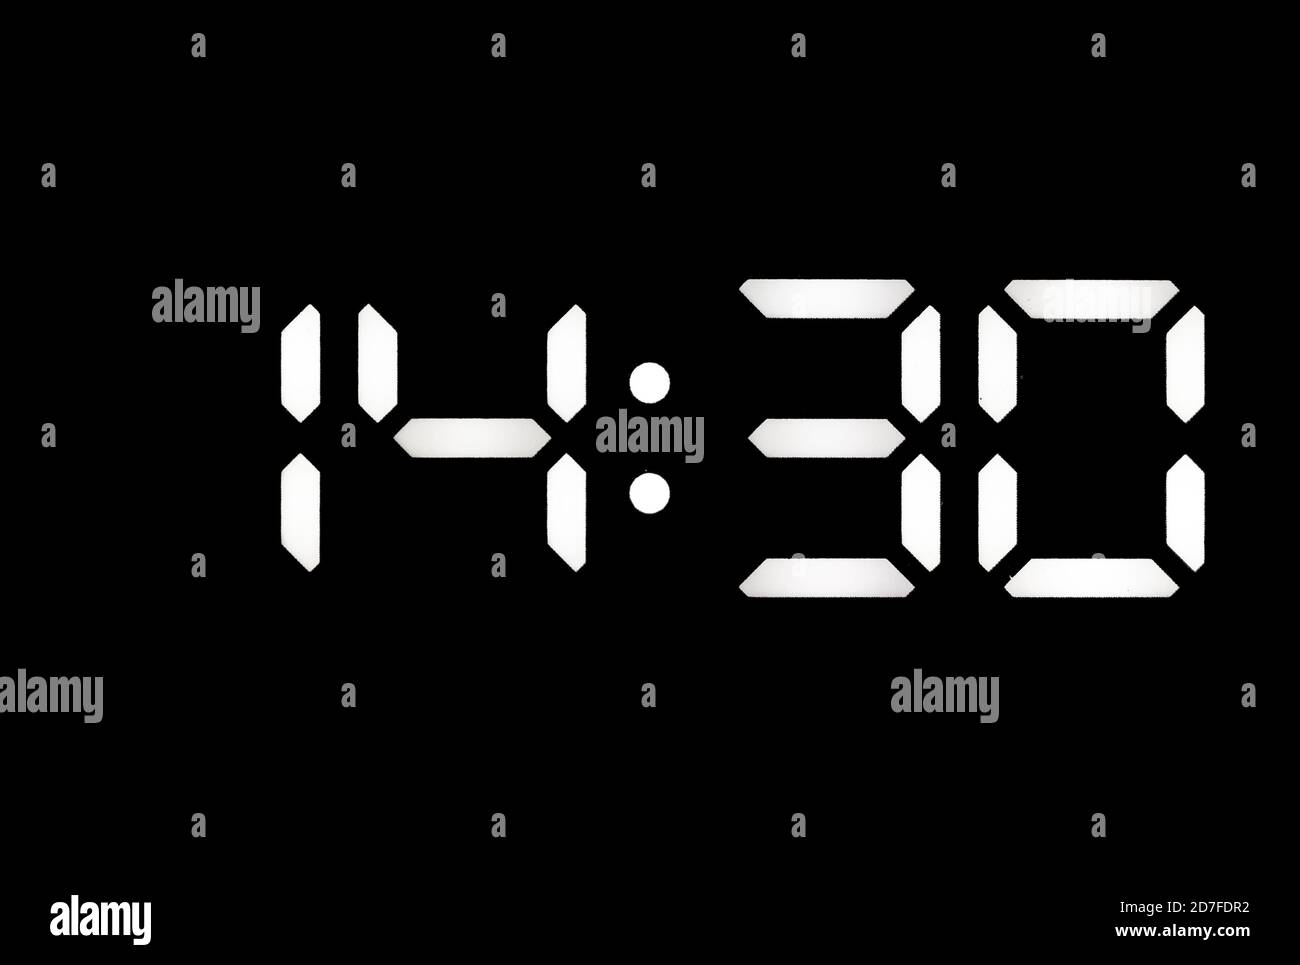 Real white led digital clock on a black background showing time 14:30 Stock Photo